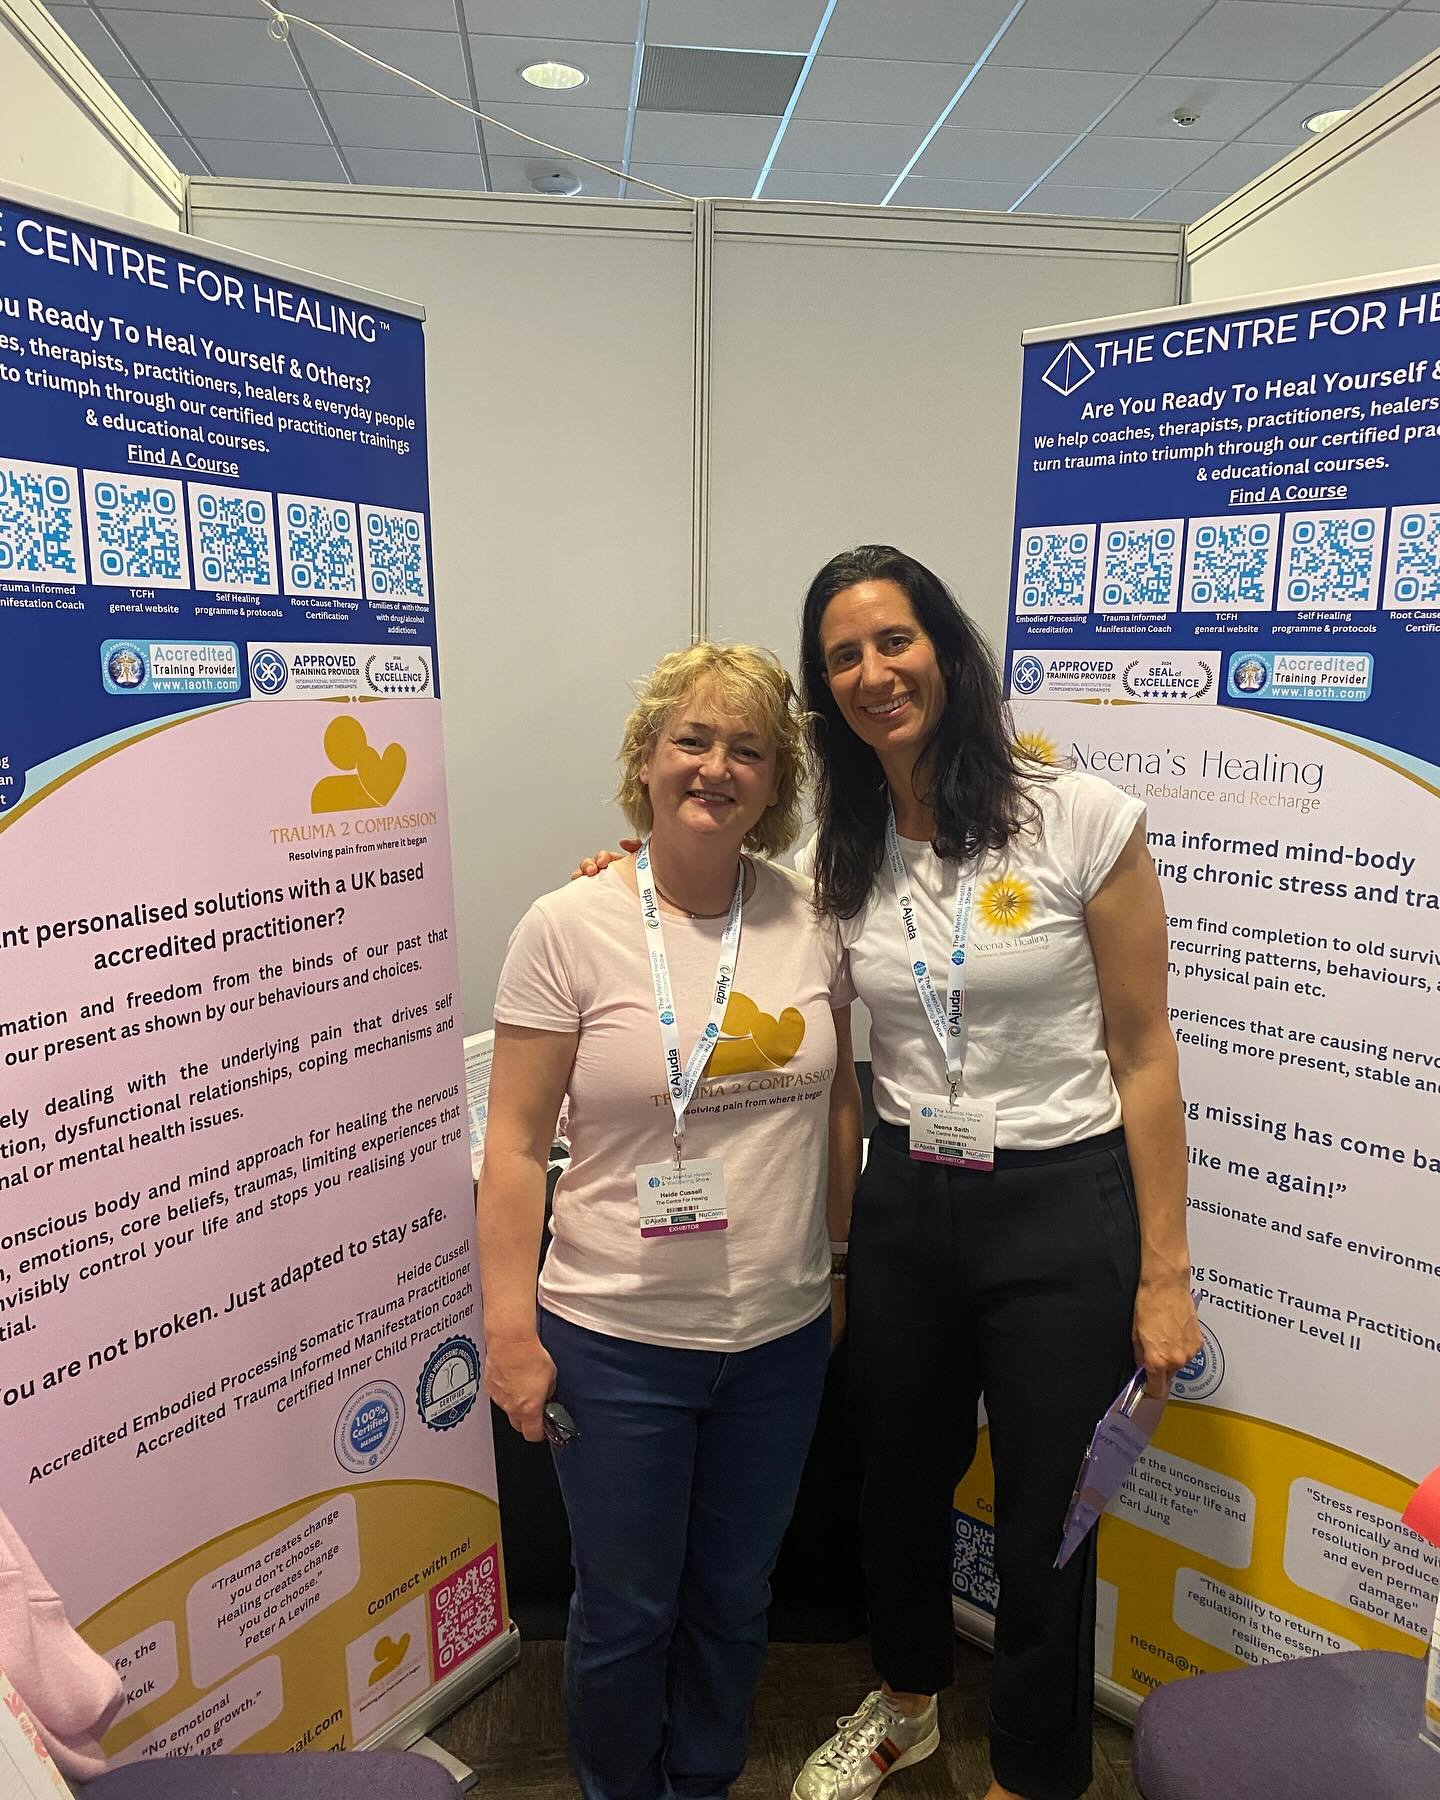 Ending Mental Health Awareness week at the #mentalhealthandwellnessshow in Cardiff stadium with Heide R Healing. 

We have met so many amazing people today working in many different ways to support people with mental health. There&rsquo;s been over o